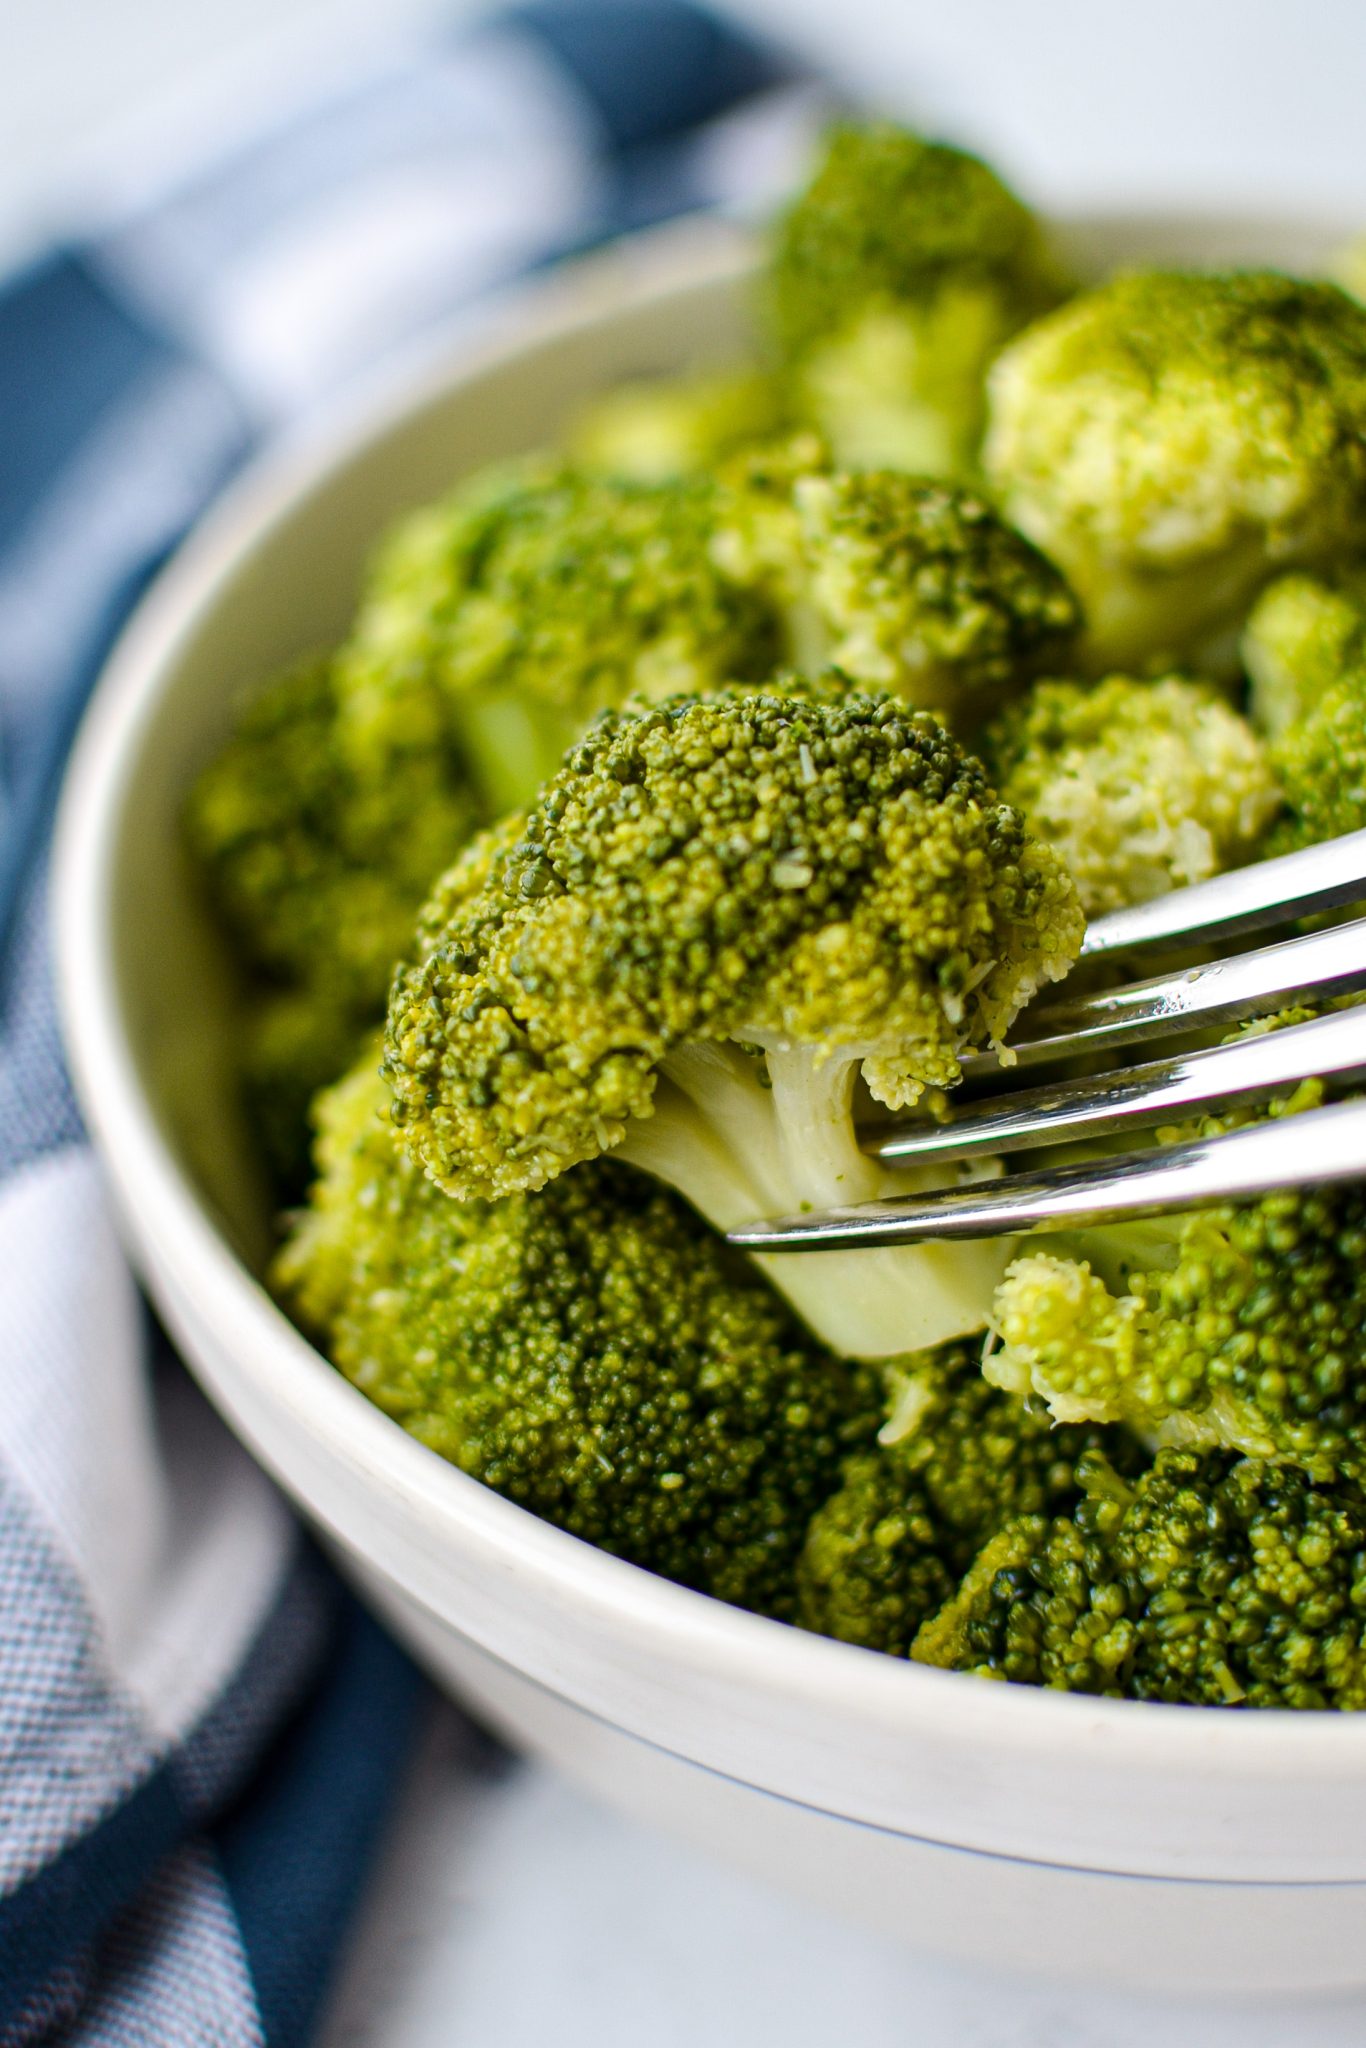 A bowl of cooked broccoli, with a fork taking a piece.